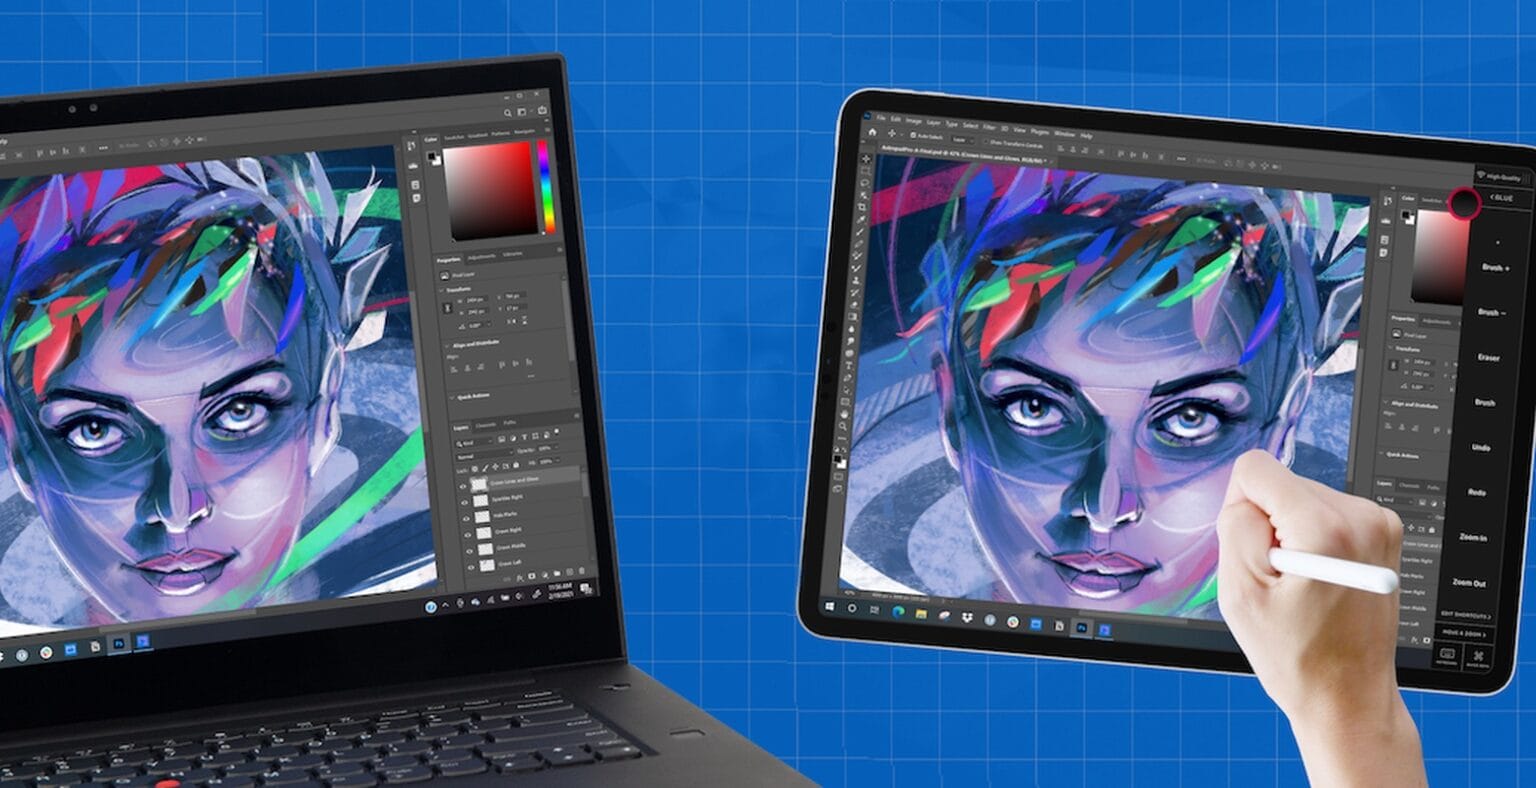 Astropad Studio on Windows lets your iPad become a drawing pad for Windows apps.